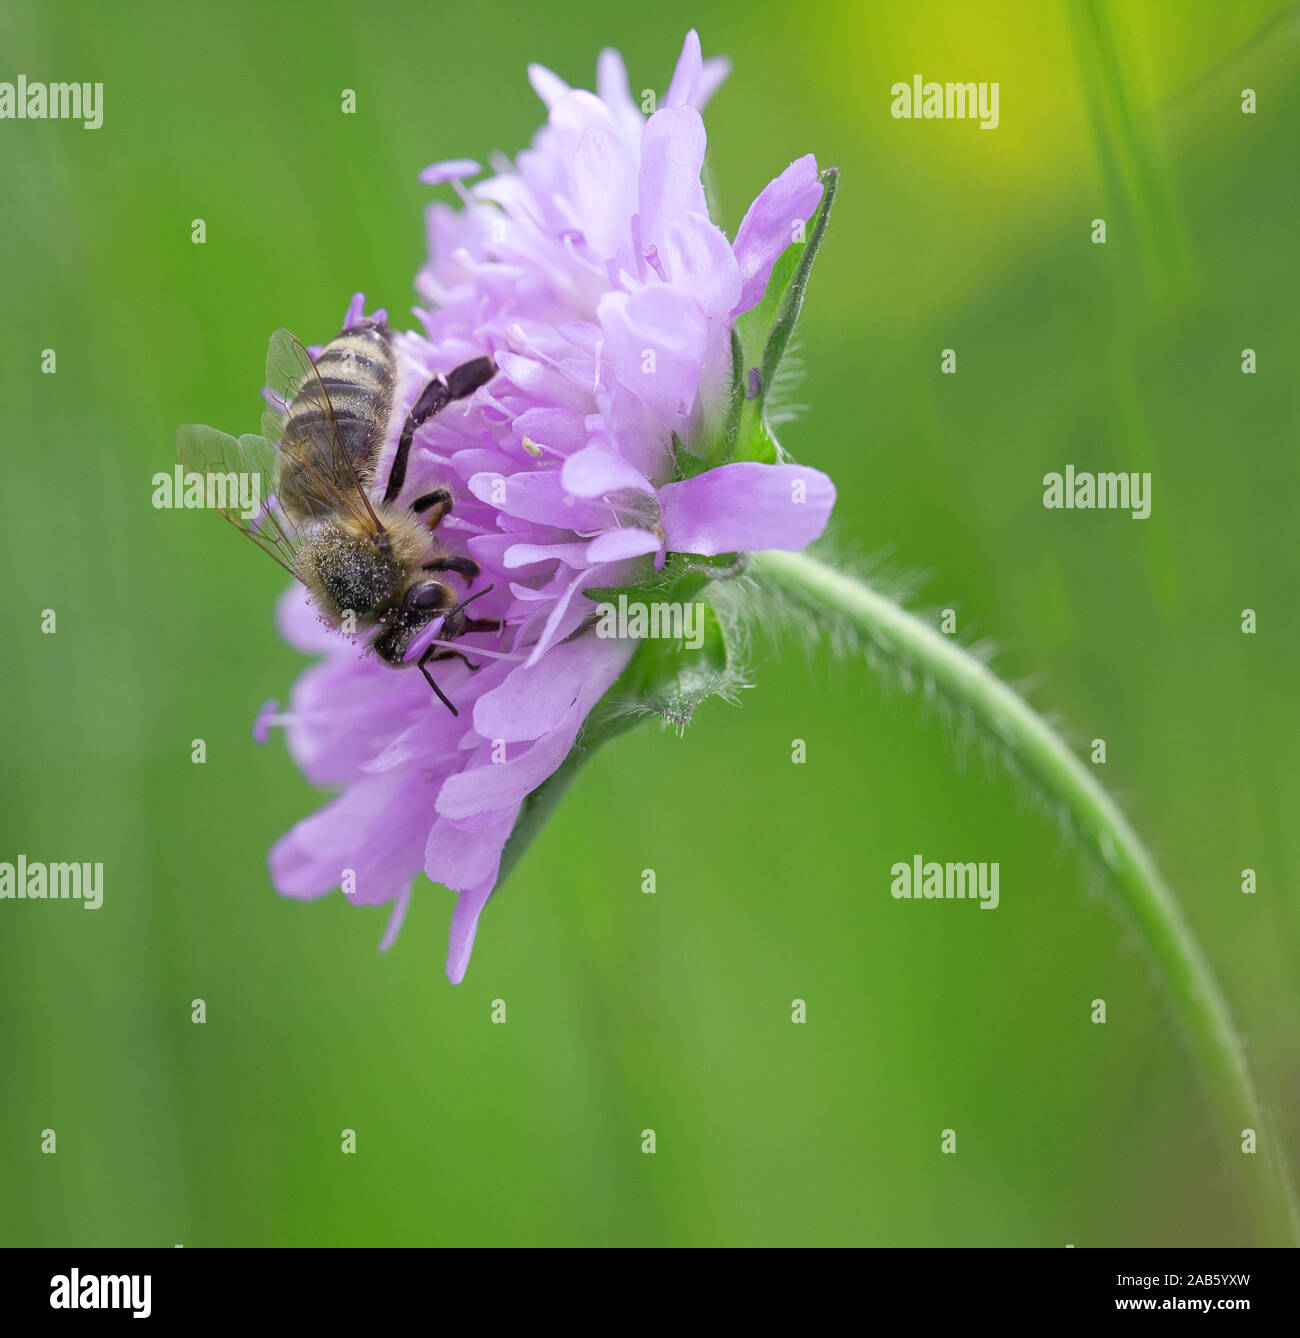 A photography of a single bee on a flower Stock Photo